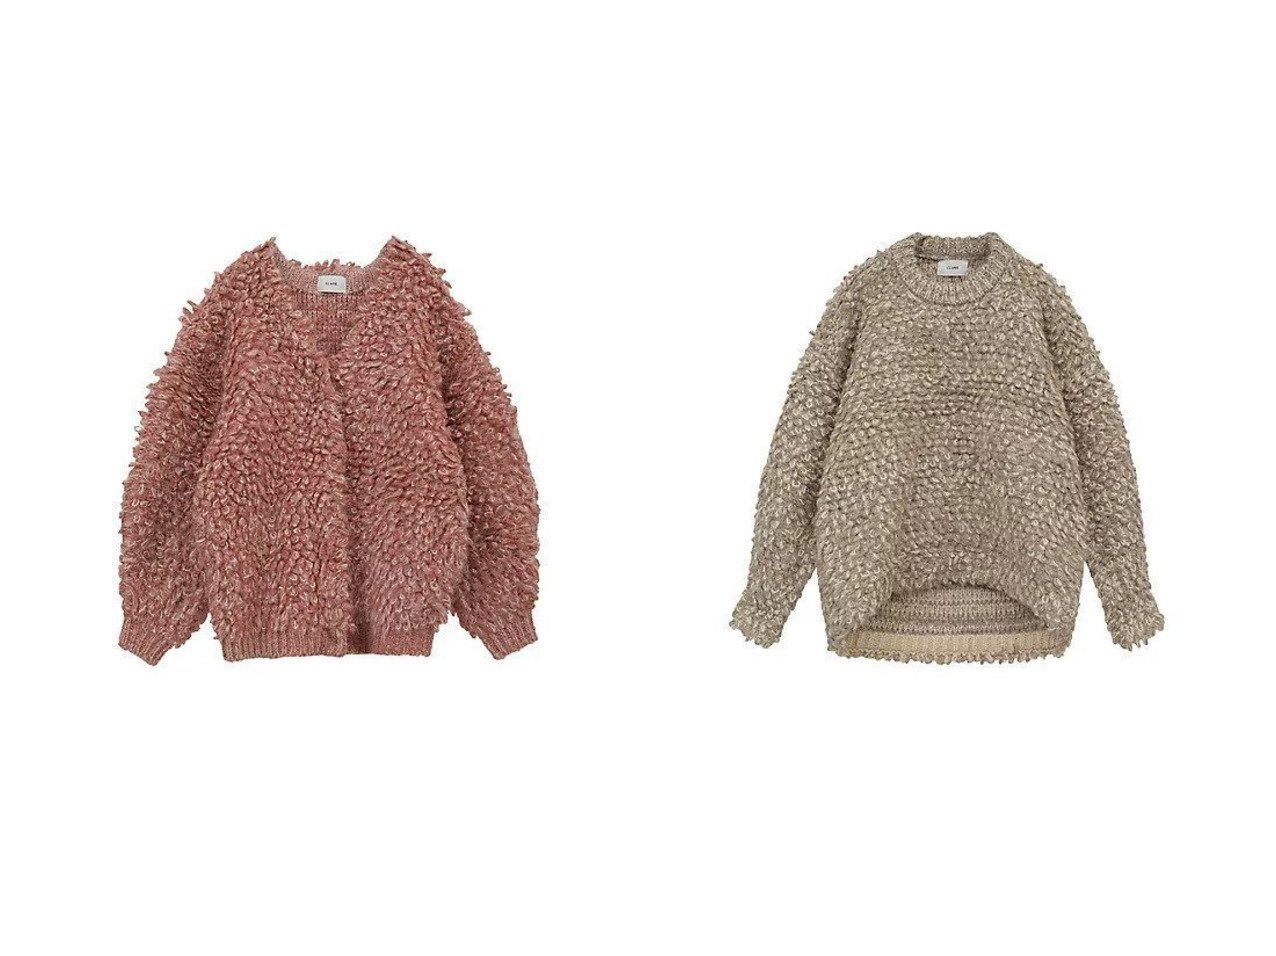 CLANE/クラネ】のMIX LOOP MOHAIR KNIT CARDIGAN&MIX LOOP MOHAIR KNIT